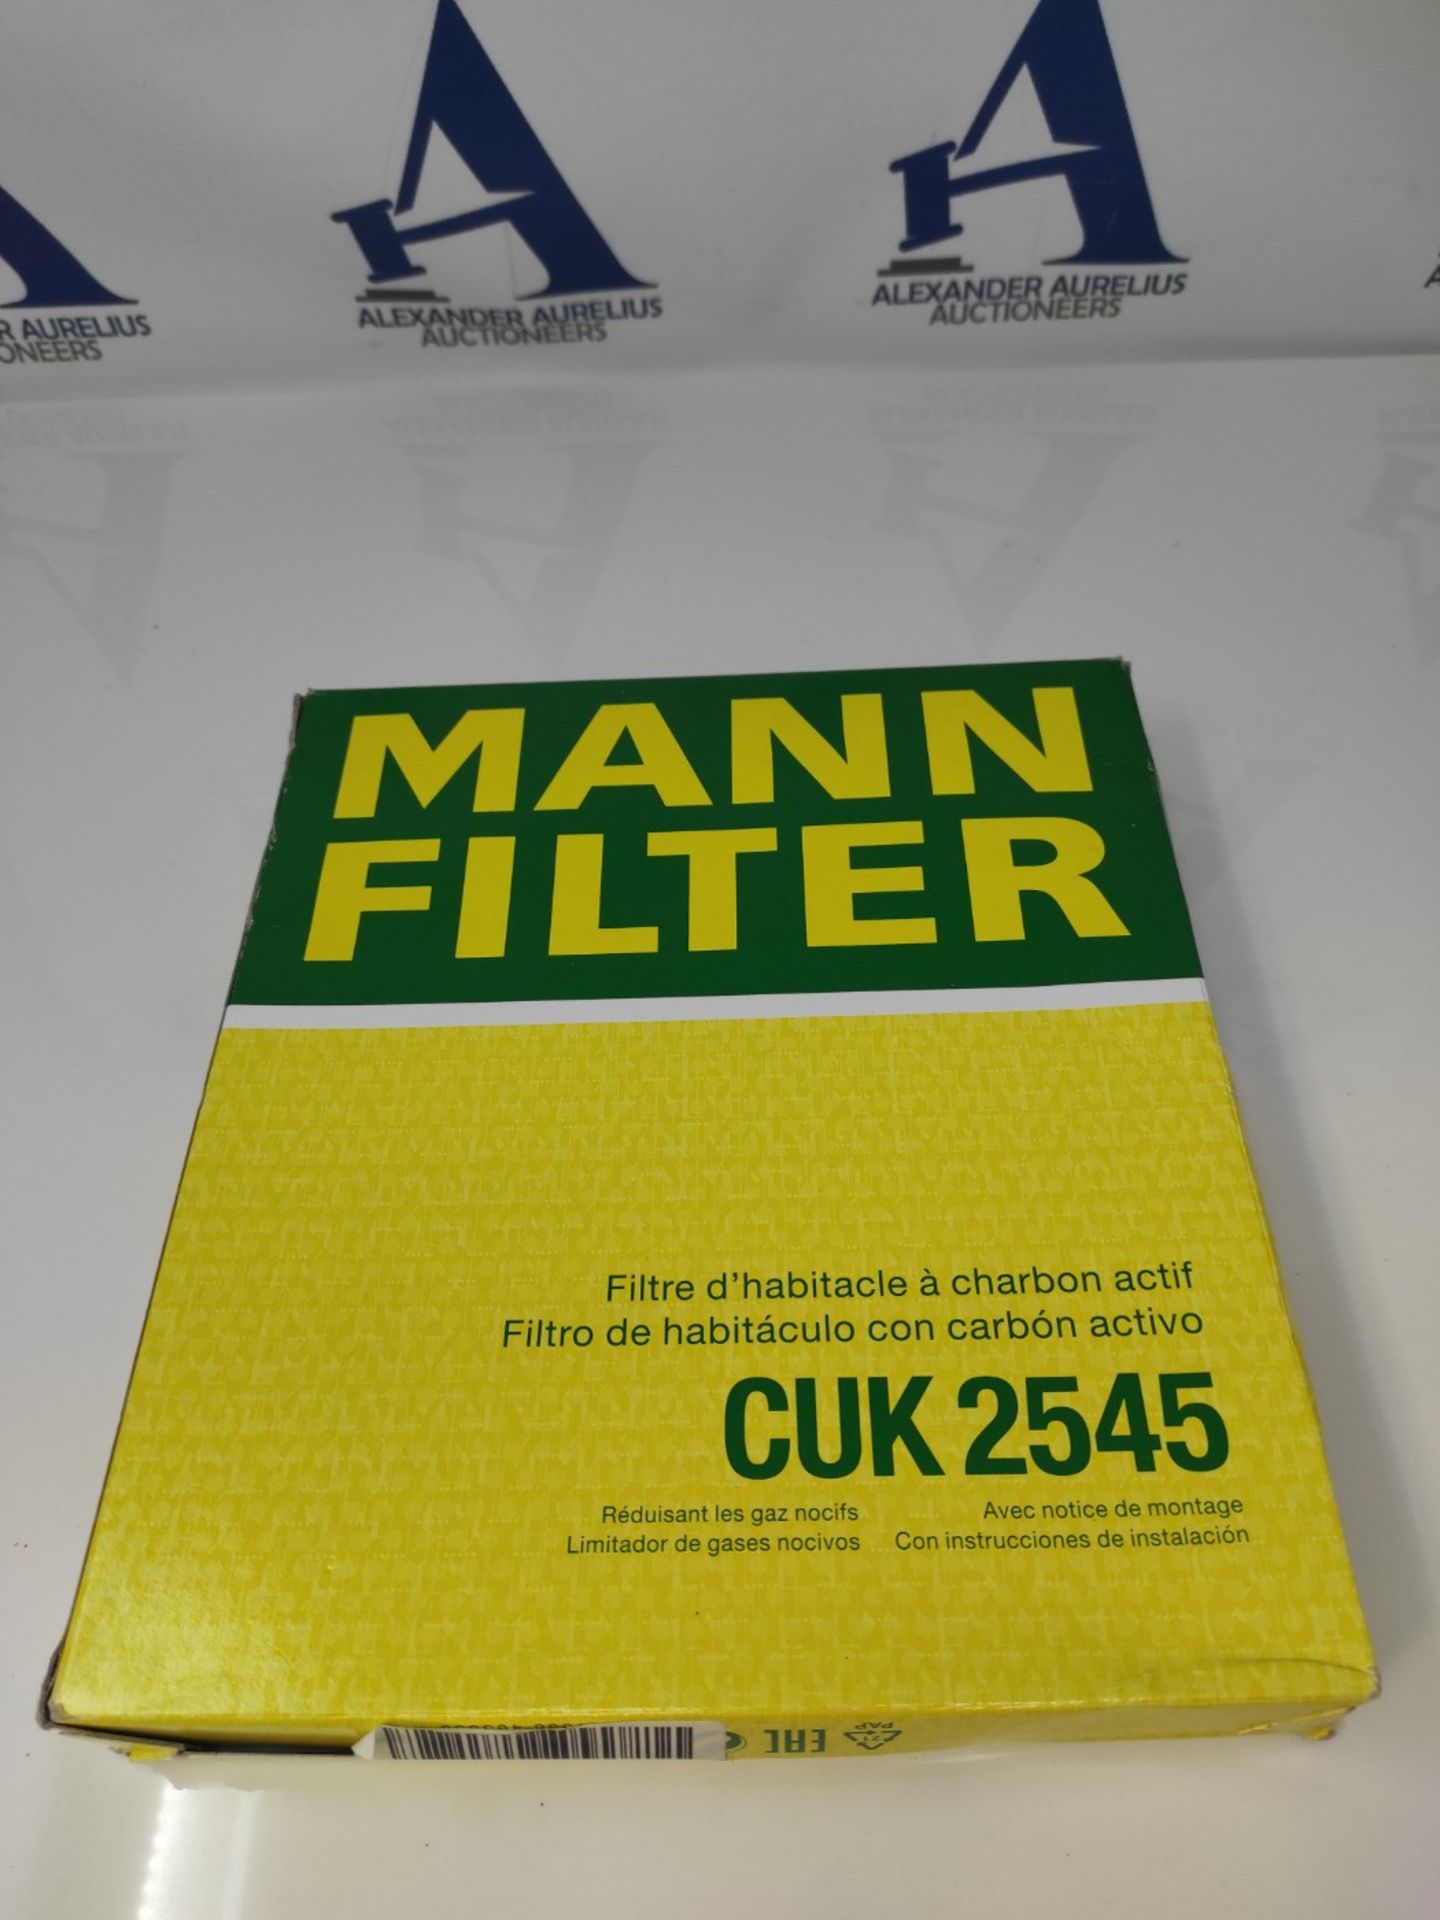 MANN-FILTER CUK 2545 Interior Filter - Pollen Filter with Activated Carbon - For Cars - Image 5 of 6